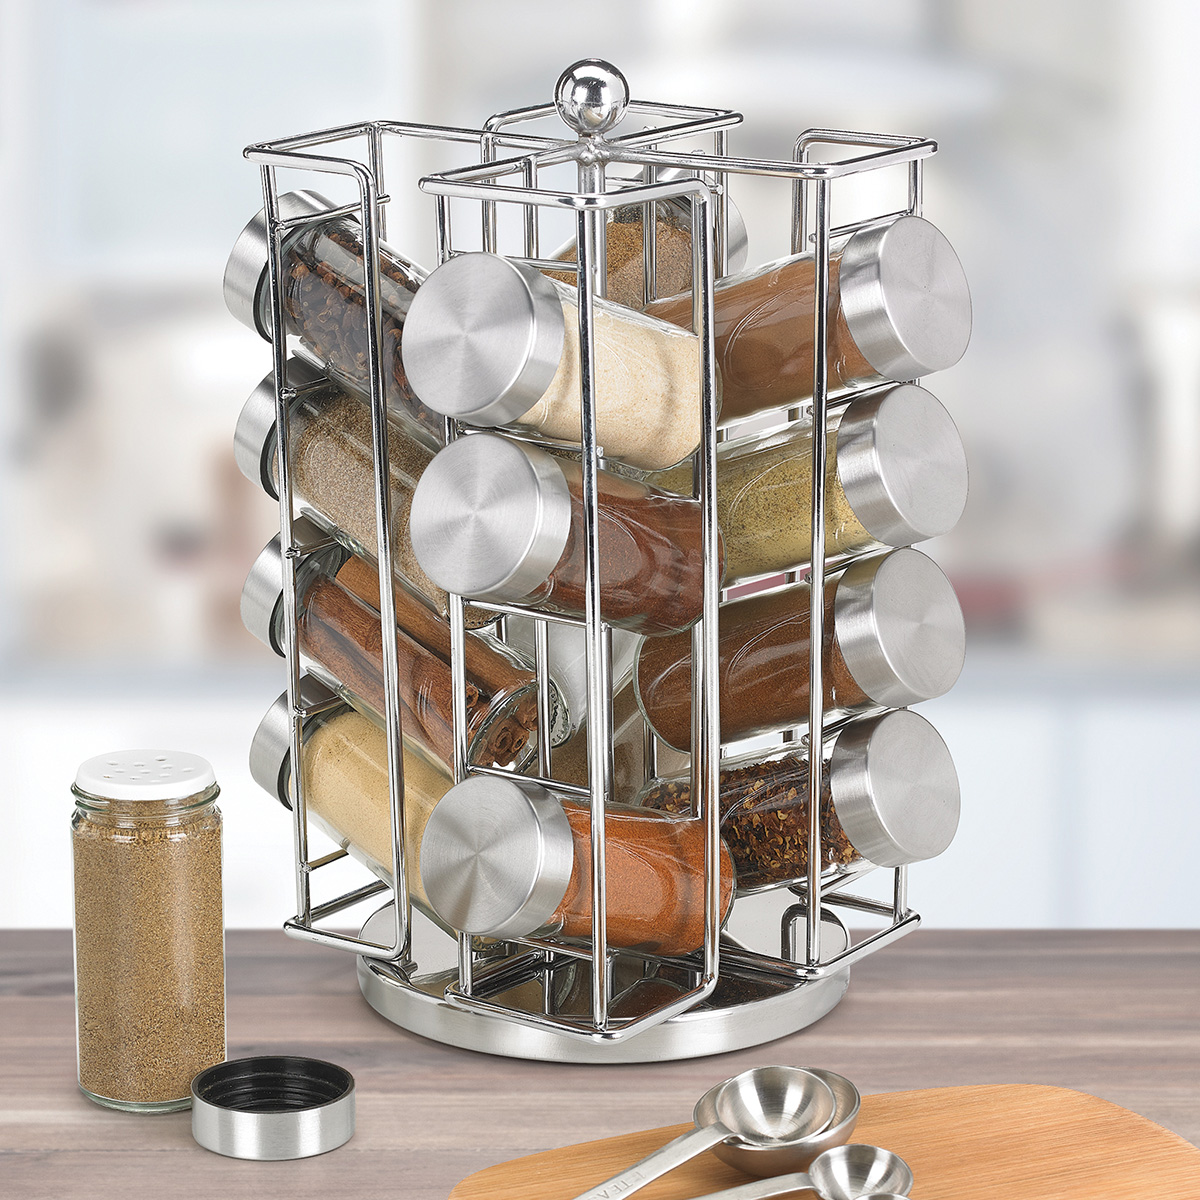 16-Bottle Chrome Revolving Spice Rack | The Container Store